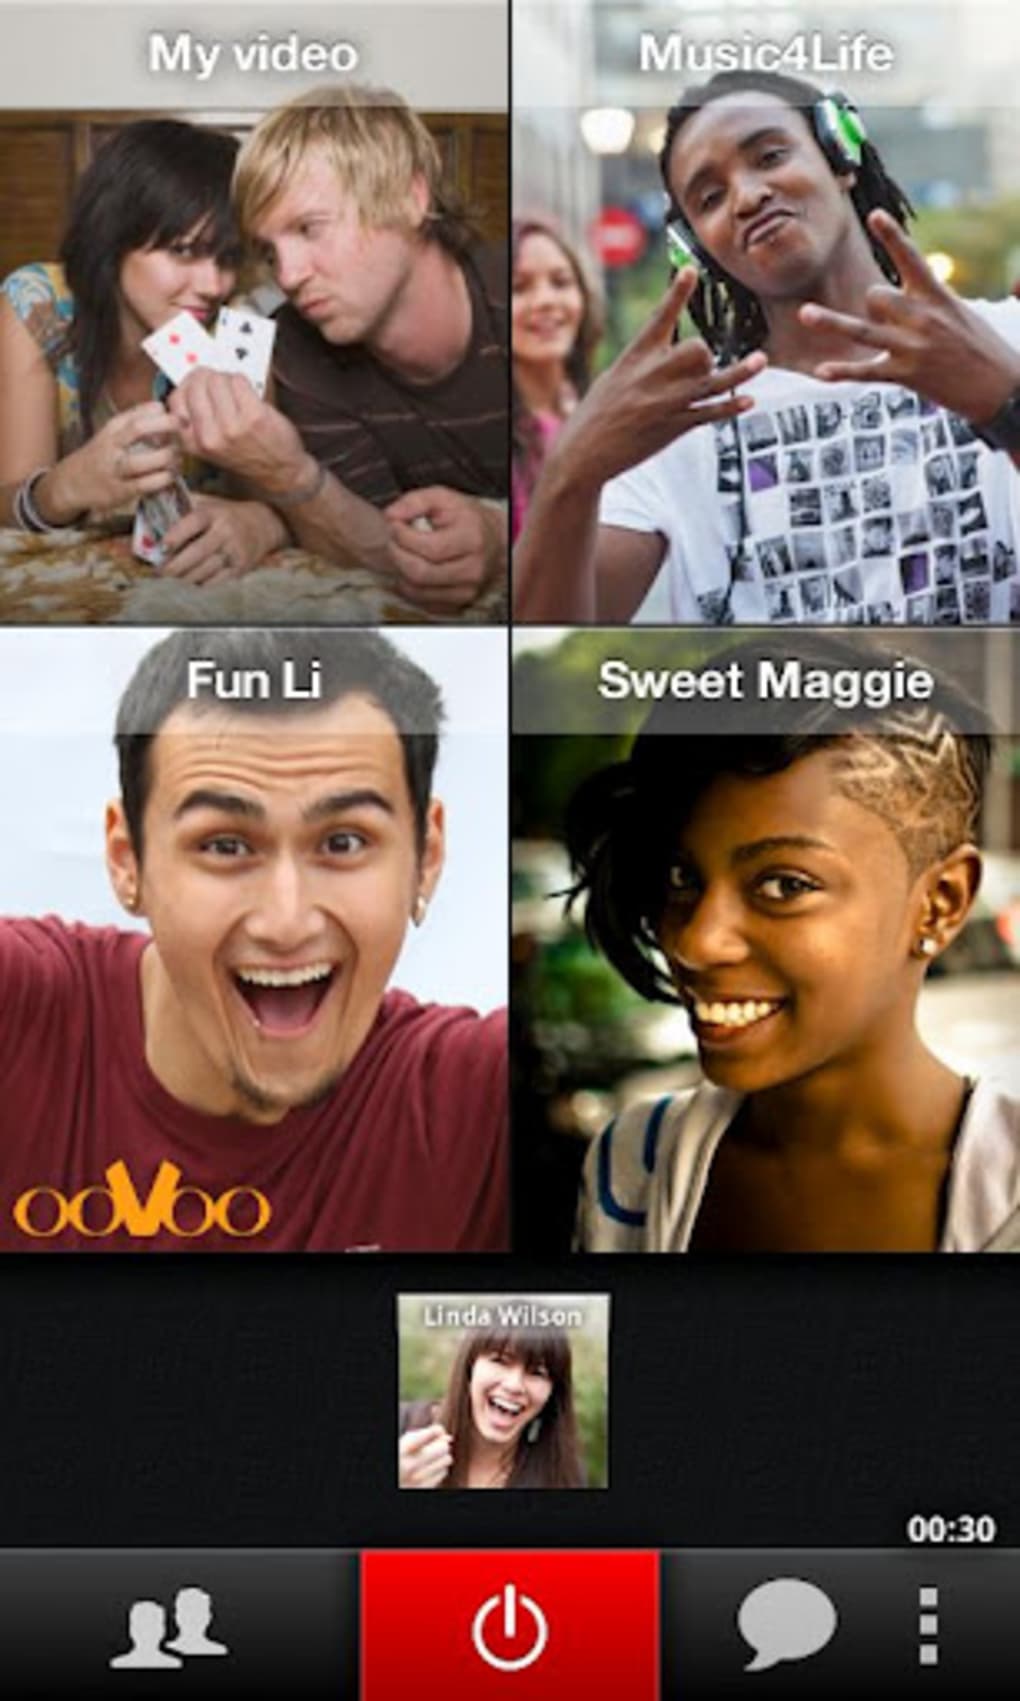 oovoo video chat free download